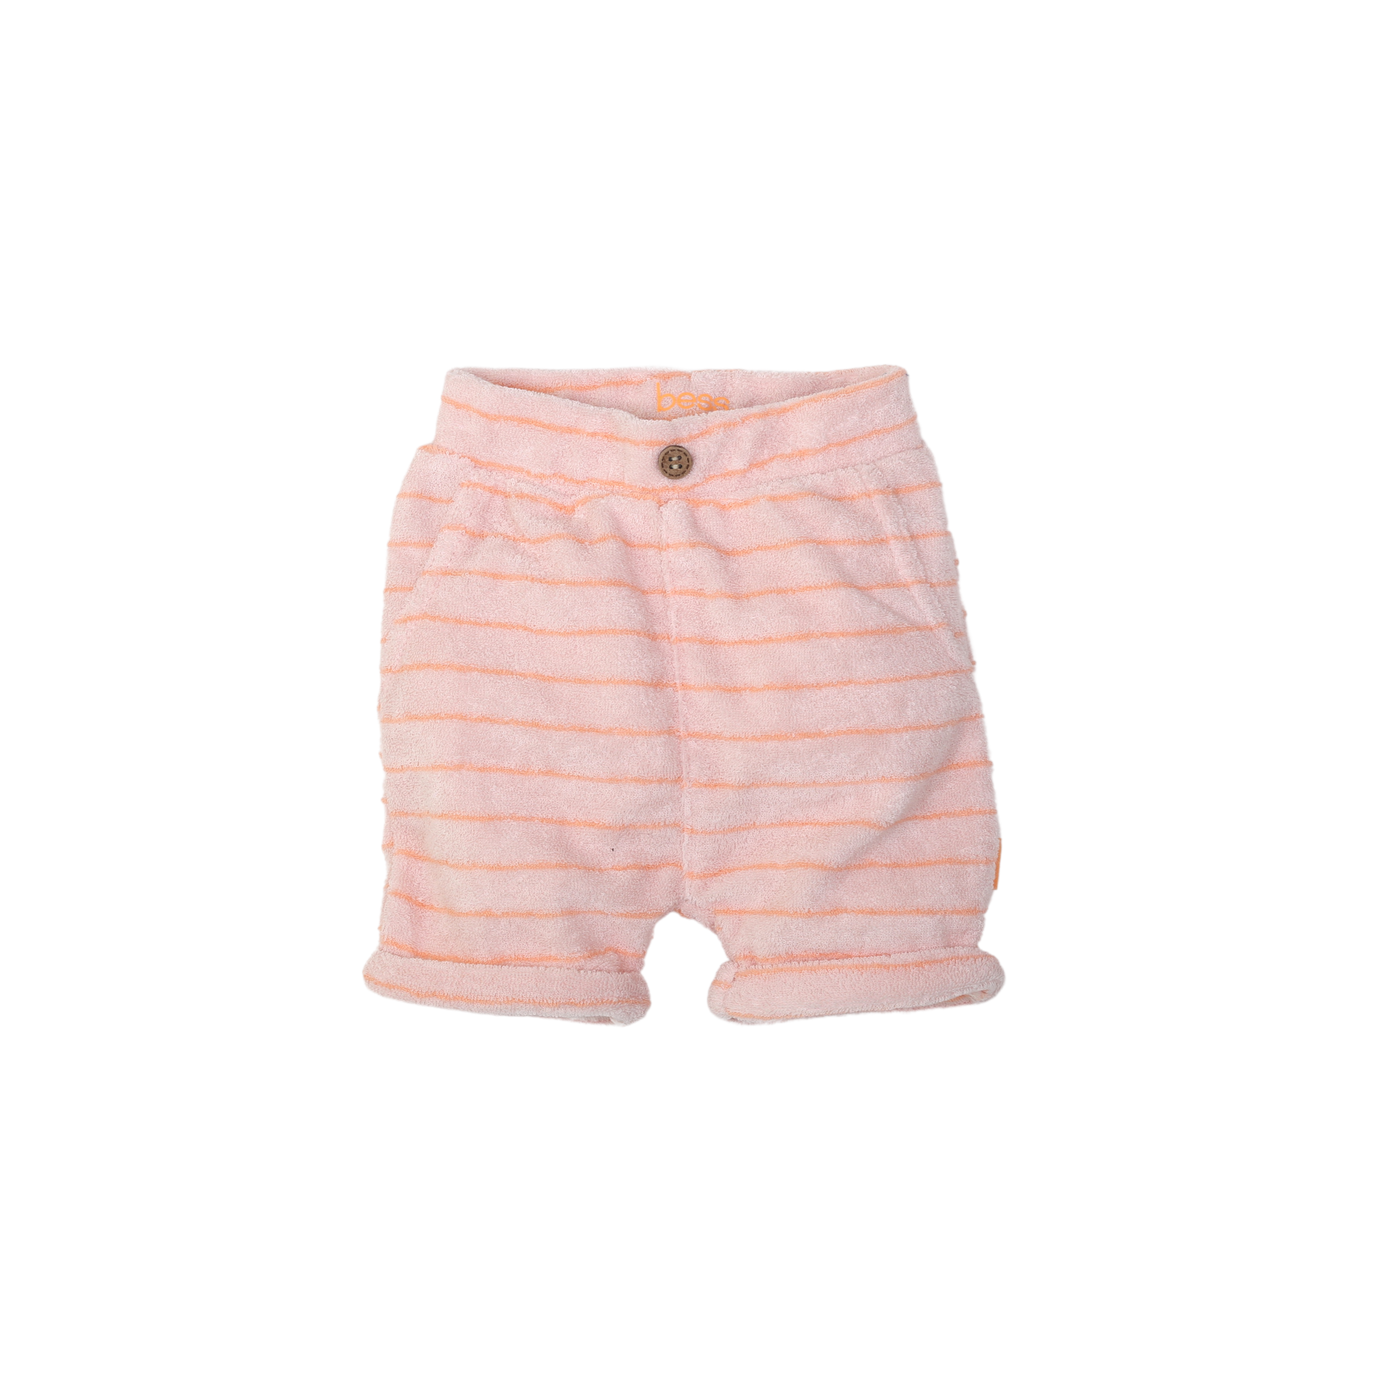 Bess S23 Shorts Striped Pink 231106-007